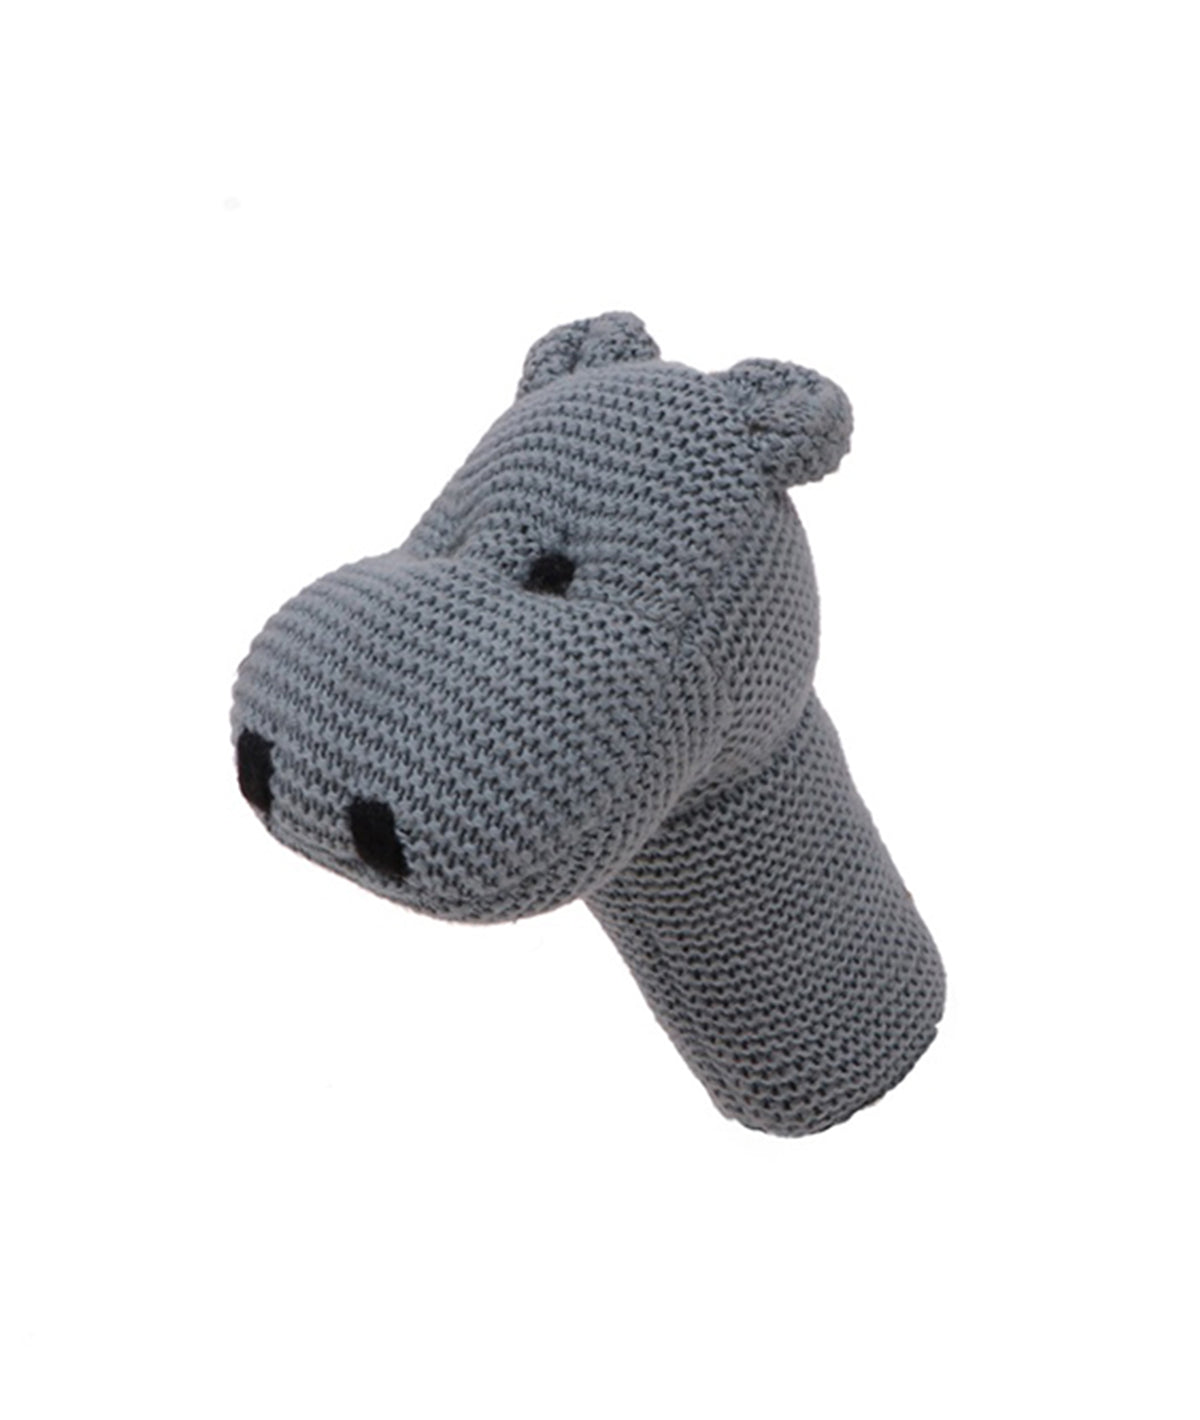 Rattle Hippo Mineral Blue Colour Cotton Knitted Stuffed / Plush / Soft Toy for Babies and Kids